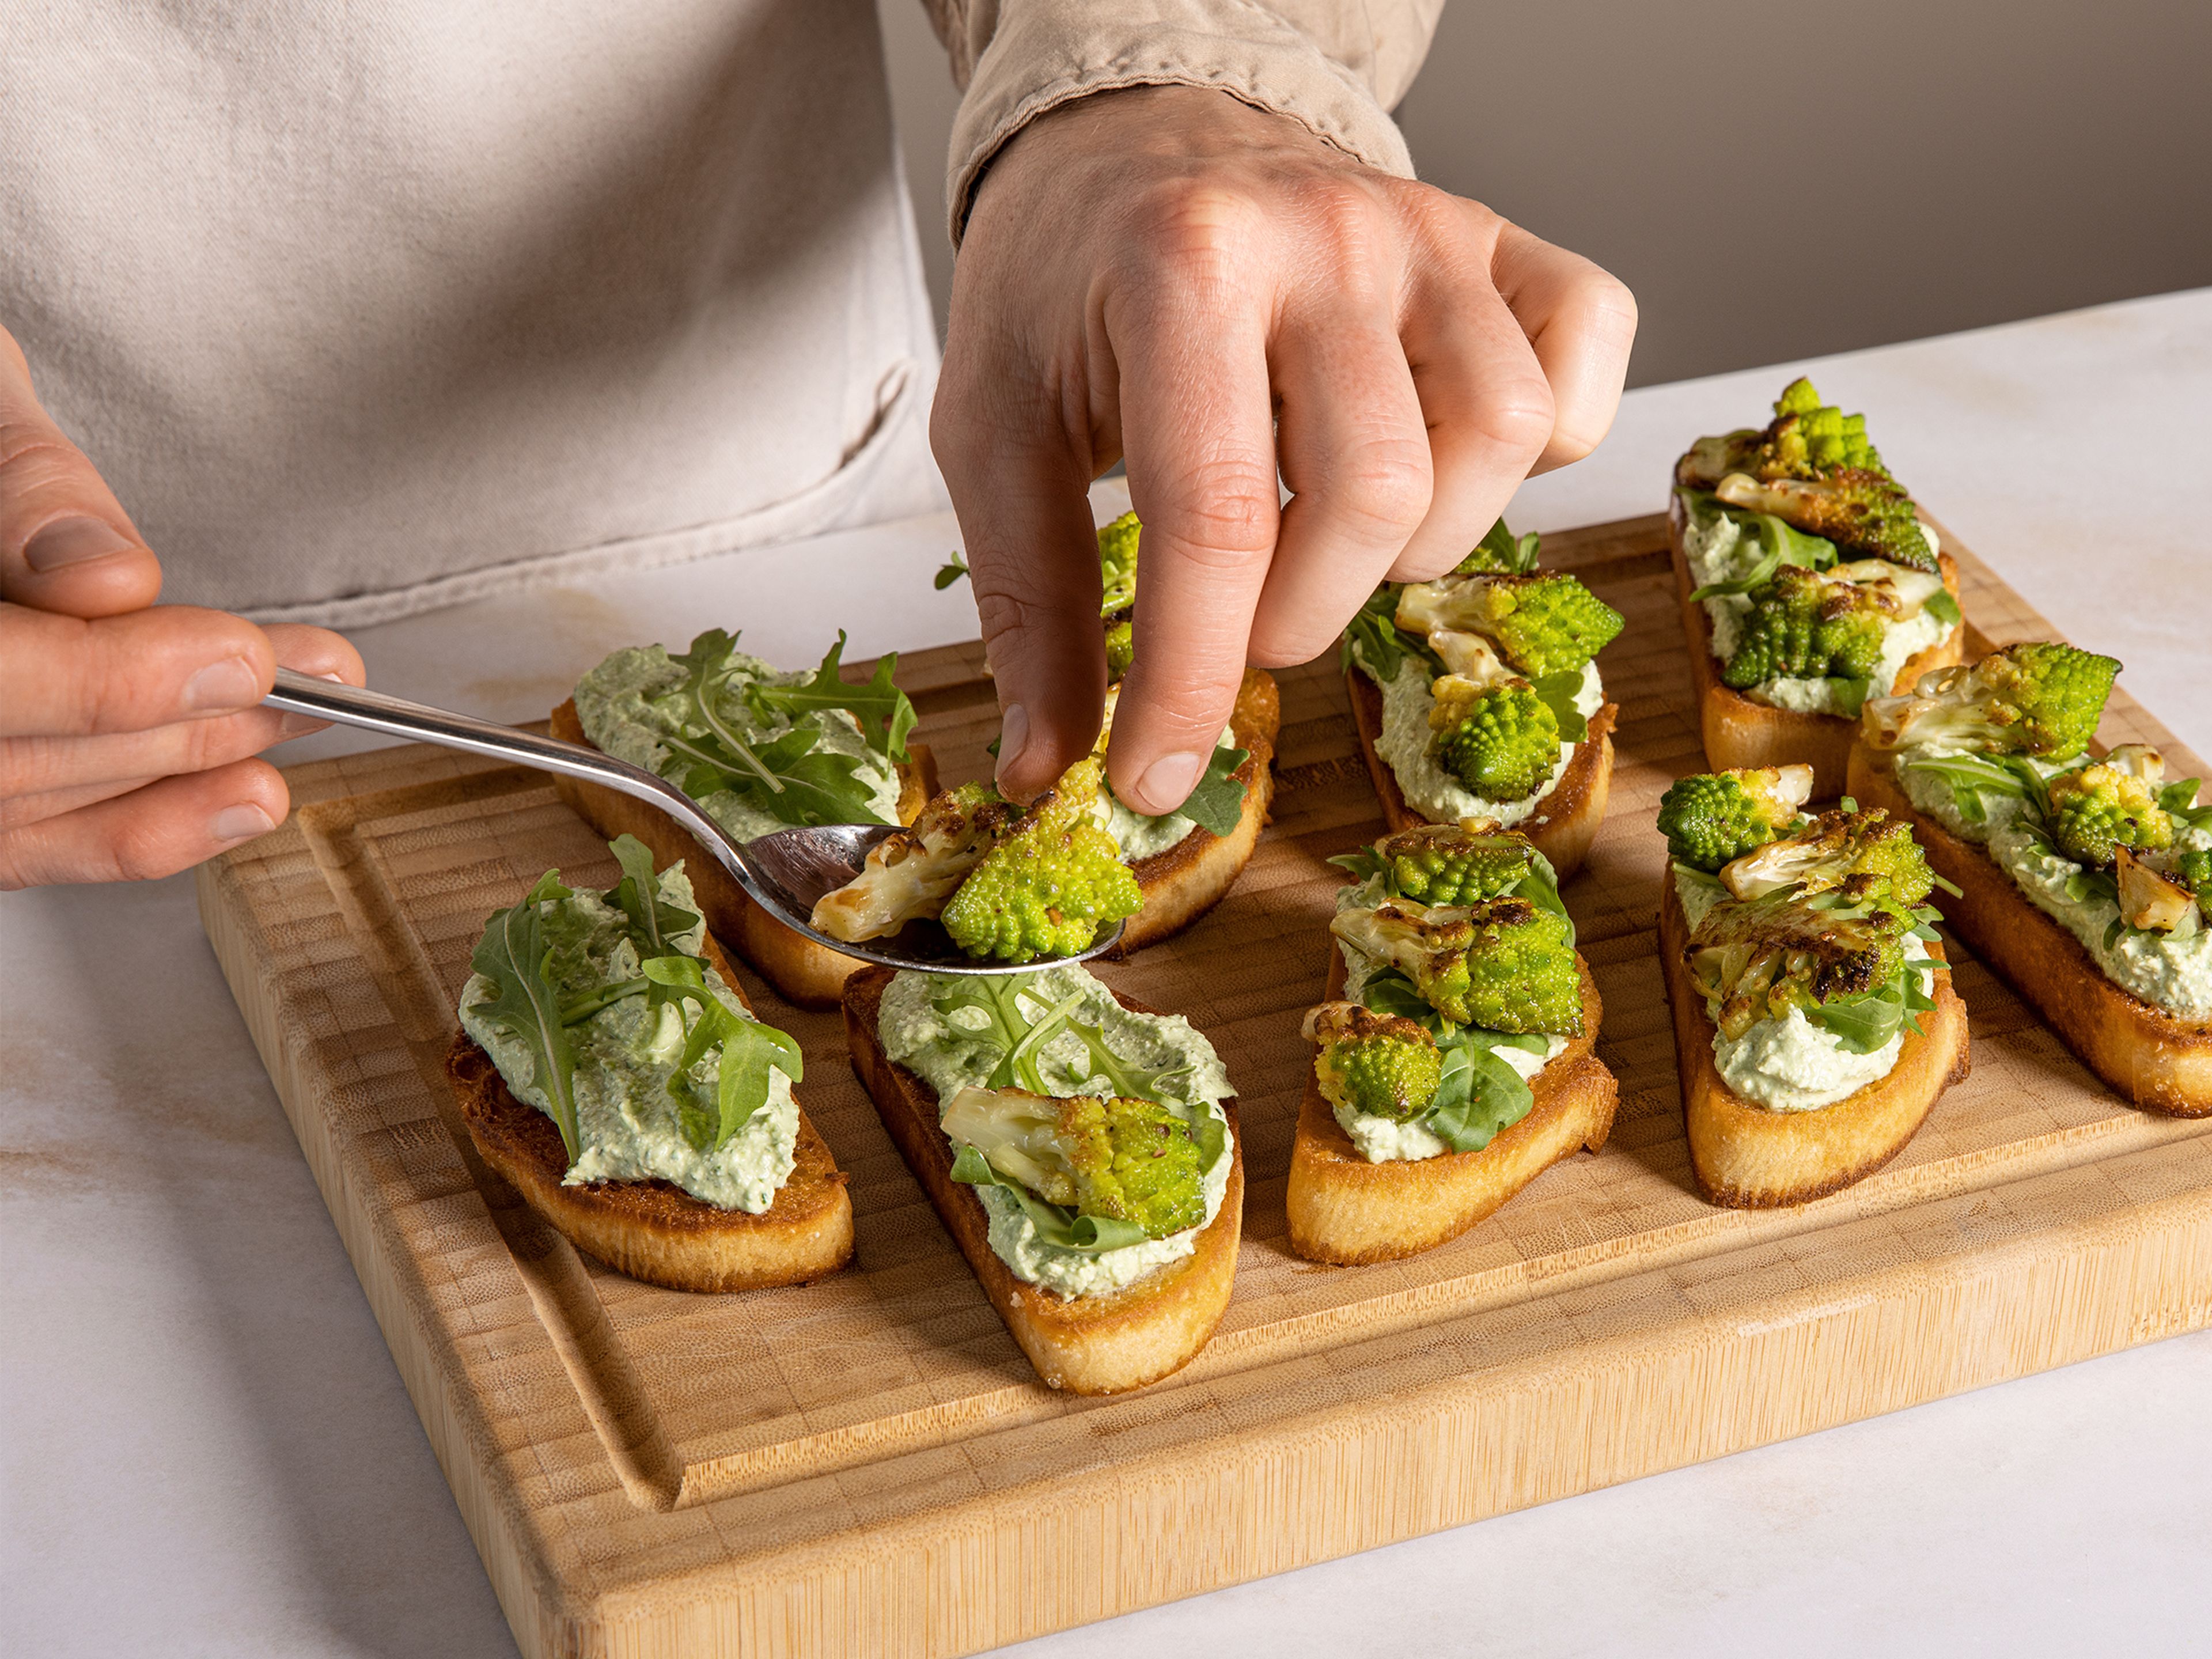 Spread the cottage cheese and basil cream on the toasted ciabatta slices, arrange a few Romanesco florets on top, and garnish with arugula, a little olive oil, sea salt, pepper, and lemon zest.